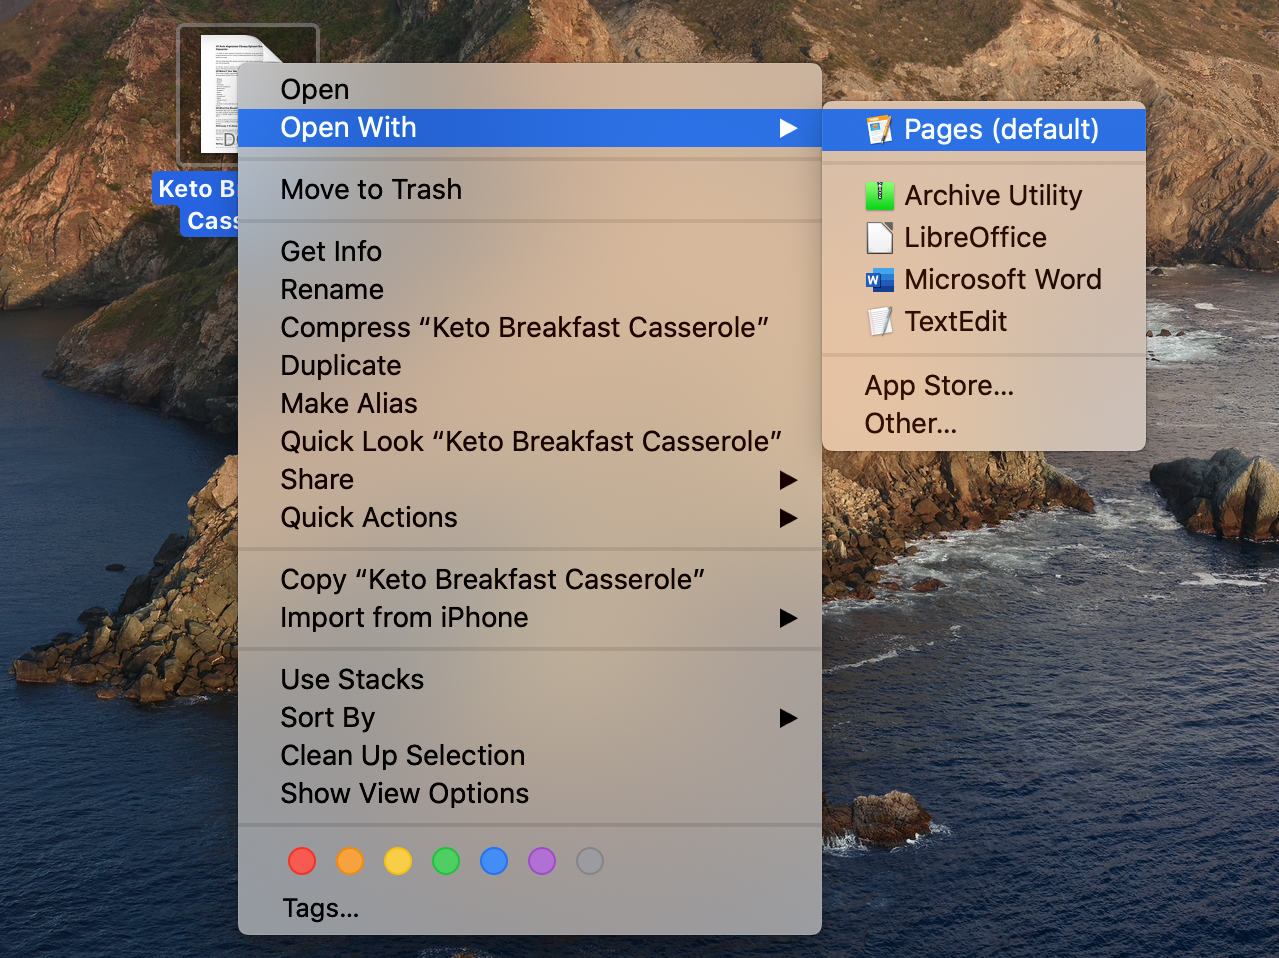 online docx viewer for mac